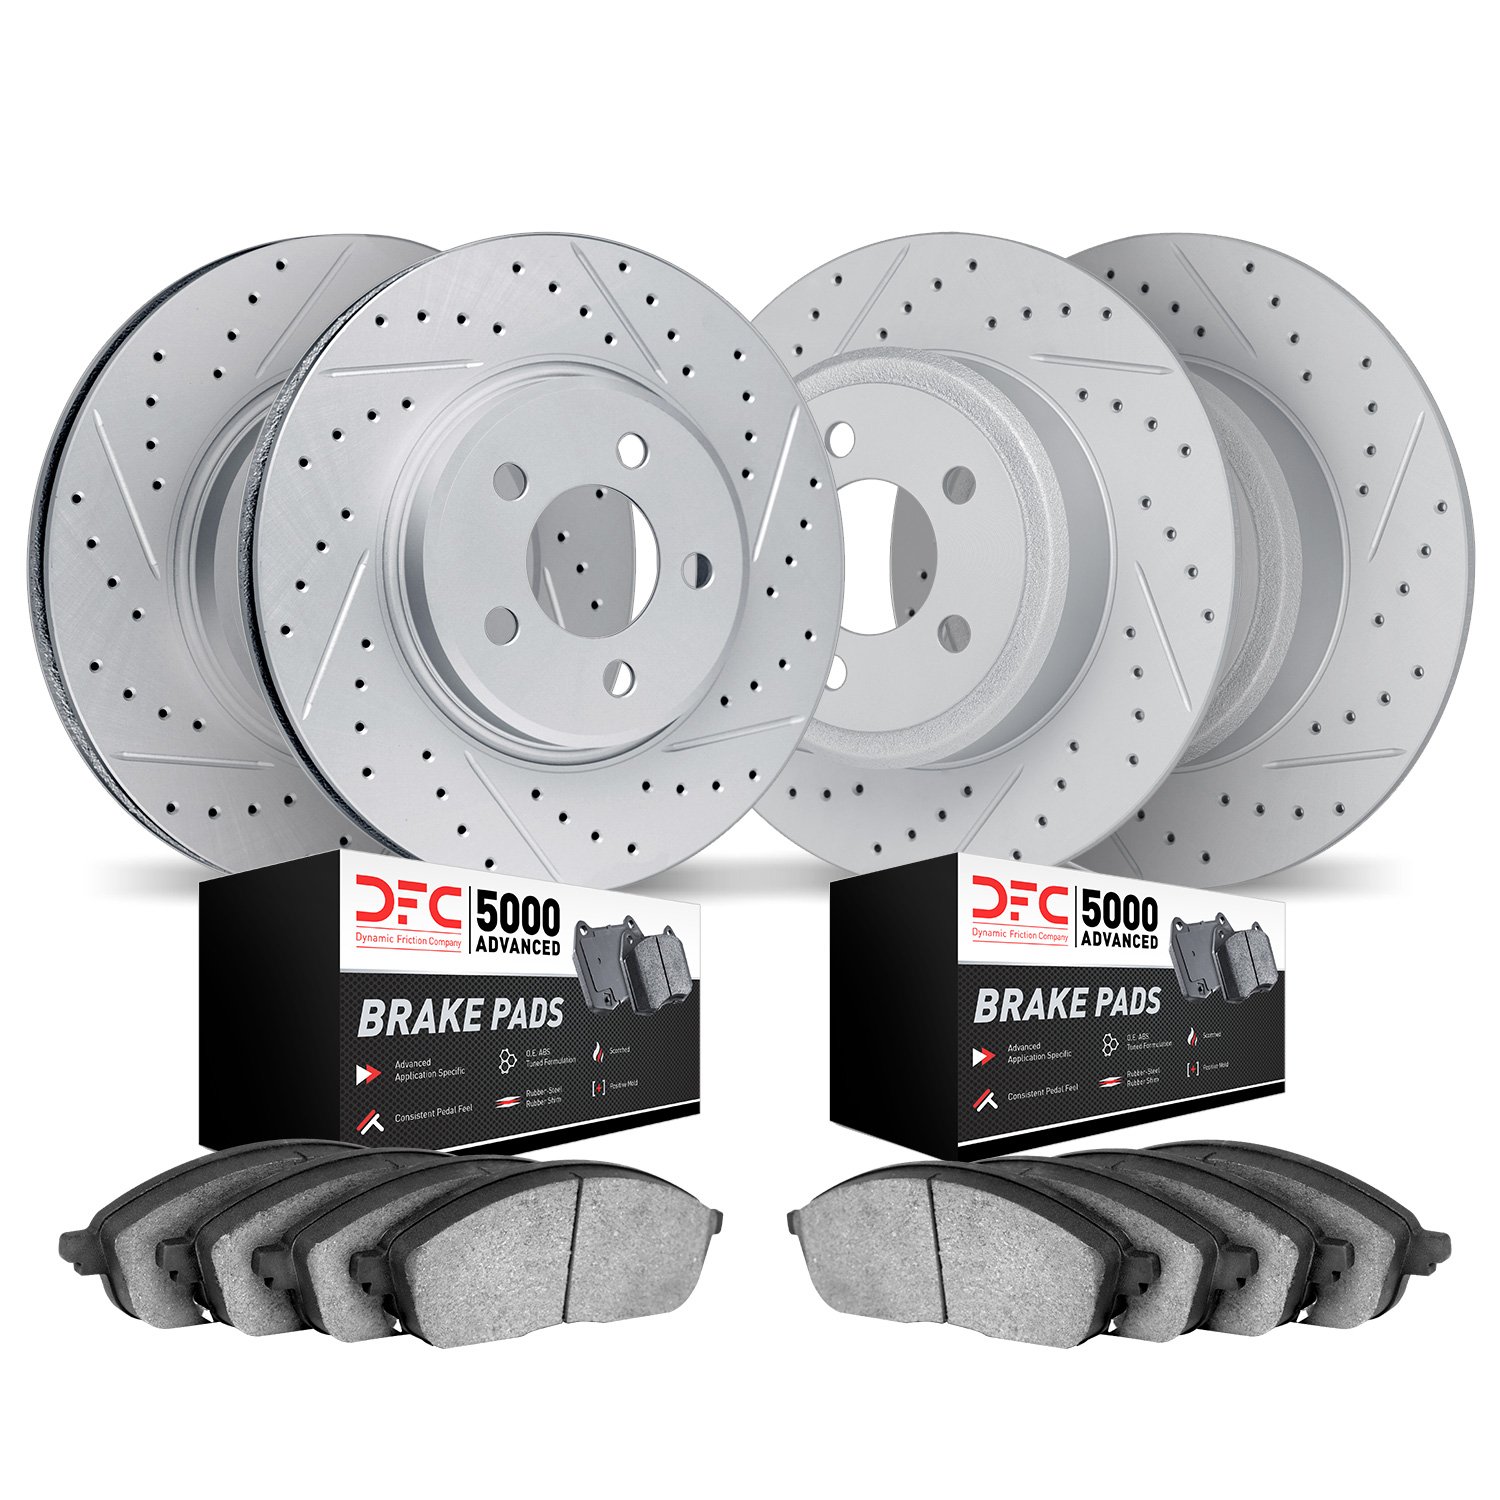 2504-67052 Geoperformance Drilled/Slotted Rotors w/5000 Advanced Brake Pads Kit, 1994-1999 Infiniti/Nissan, Position: Front and